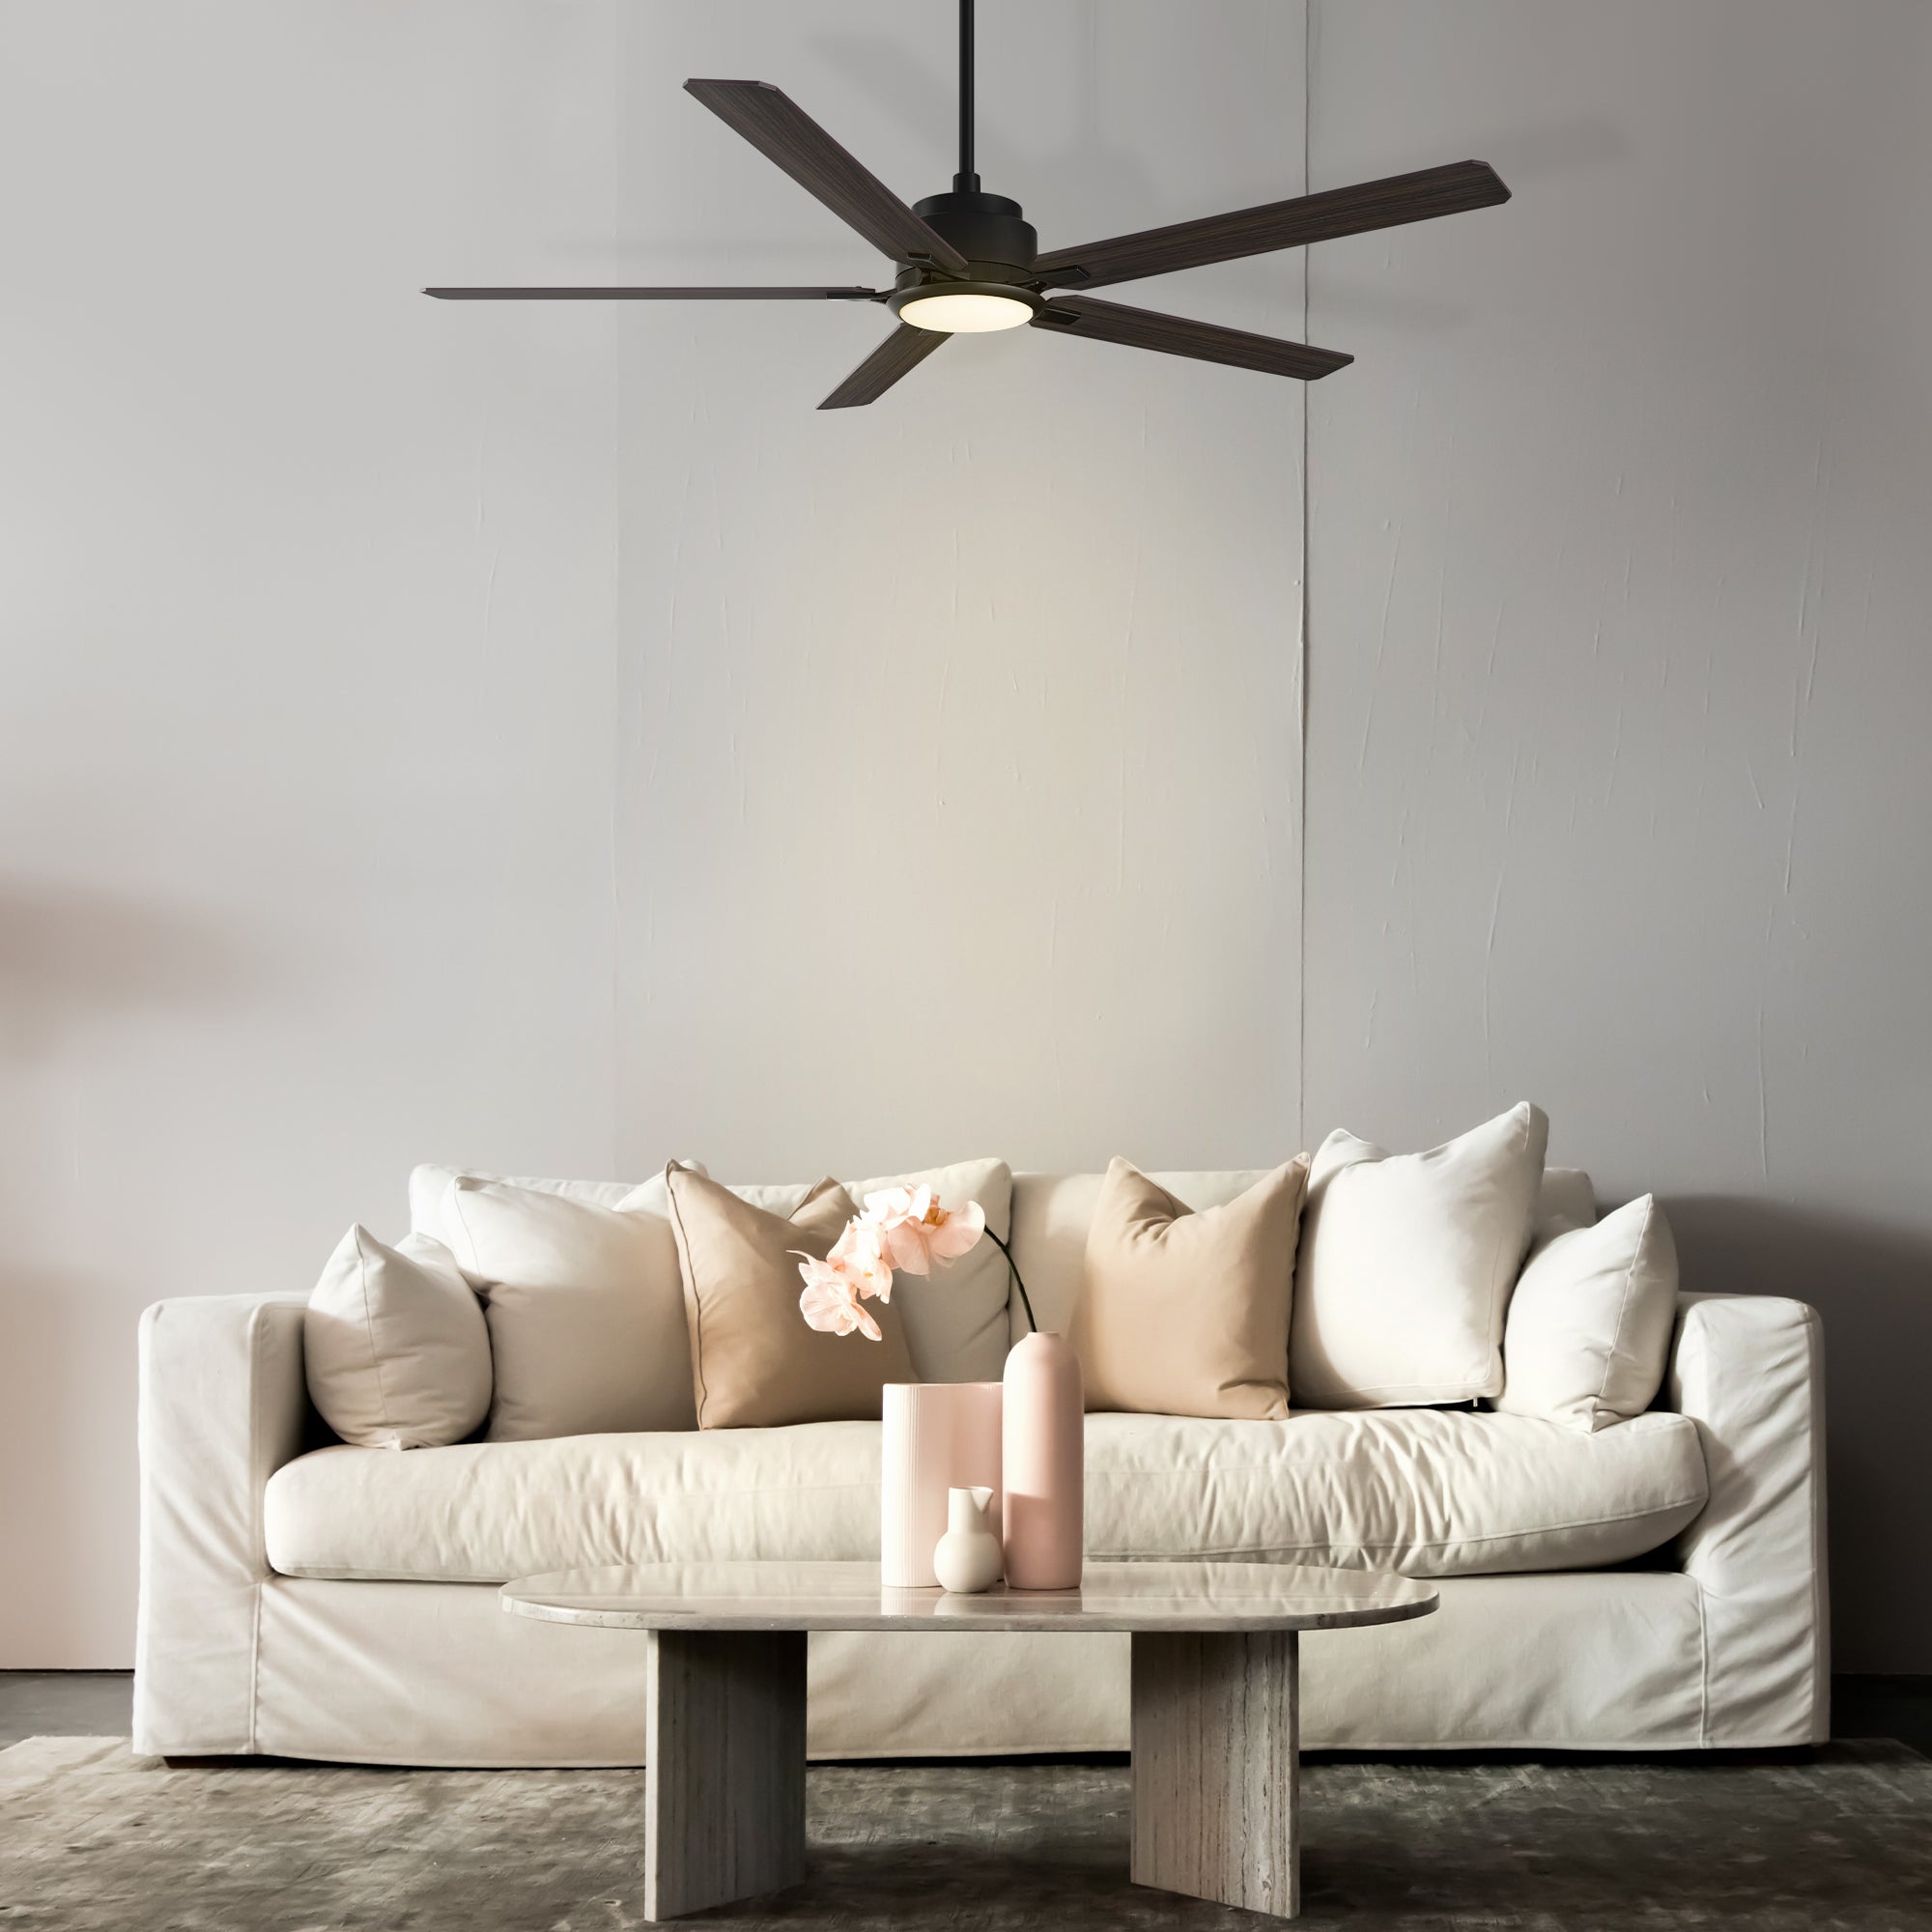 This Kyra 60" ceiling fan keeps your space cool, bright, and stylish. It is a soft modern masterpiece perfect for your large indoor living spaces. This ceiling fan is a simplicity designing with Black finish, use elegant Plywood blades and has an integrated 4000K LED cool light. The fan features Remote control to set fan preferences. #color_Wood